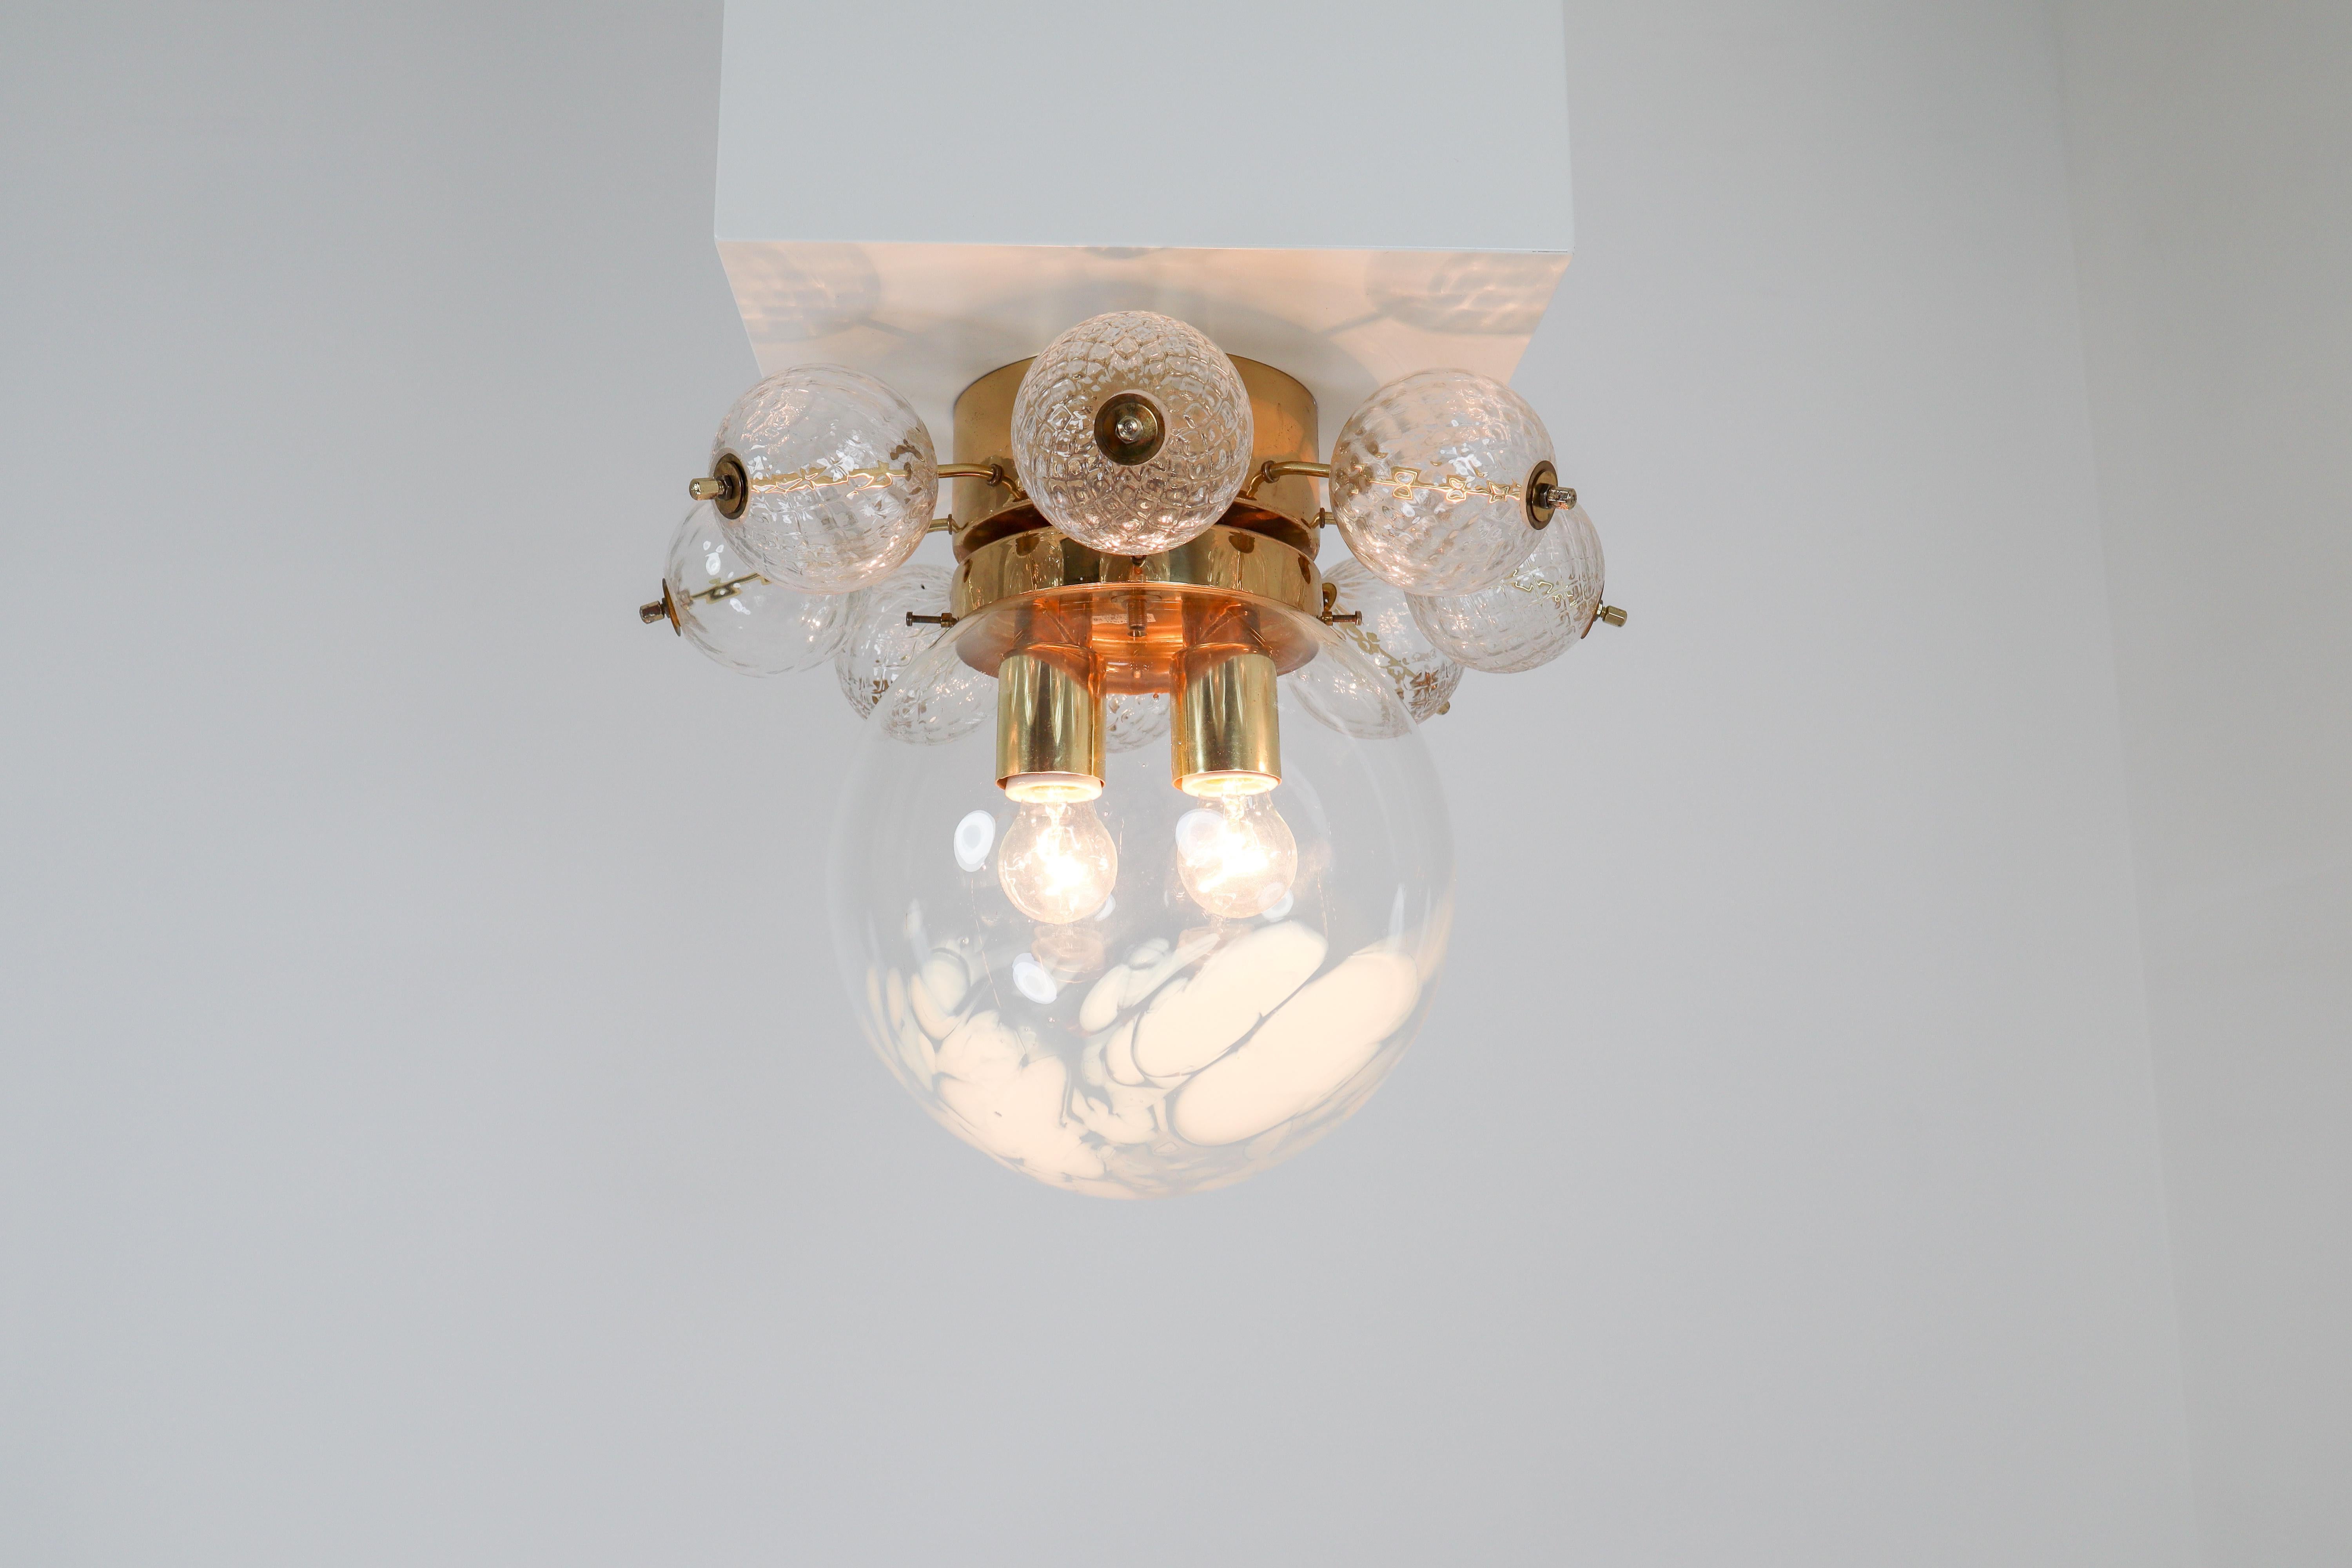 Large Midcentury Brass Ceiling Lamp-Chandelier with Hand Blown Art-Glass, 1960s In Good Condition For Sale In Almelo, NL